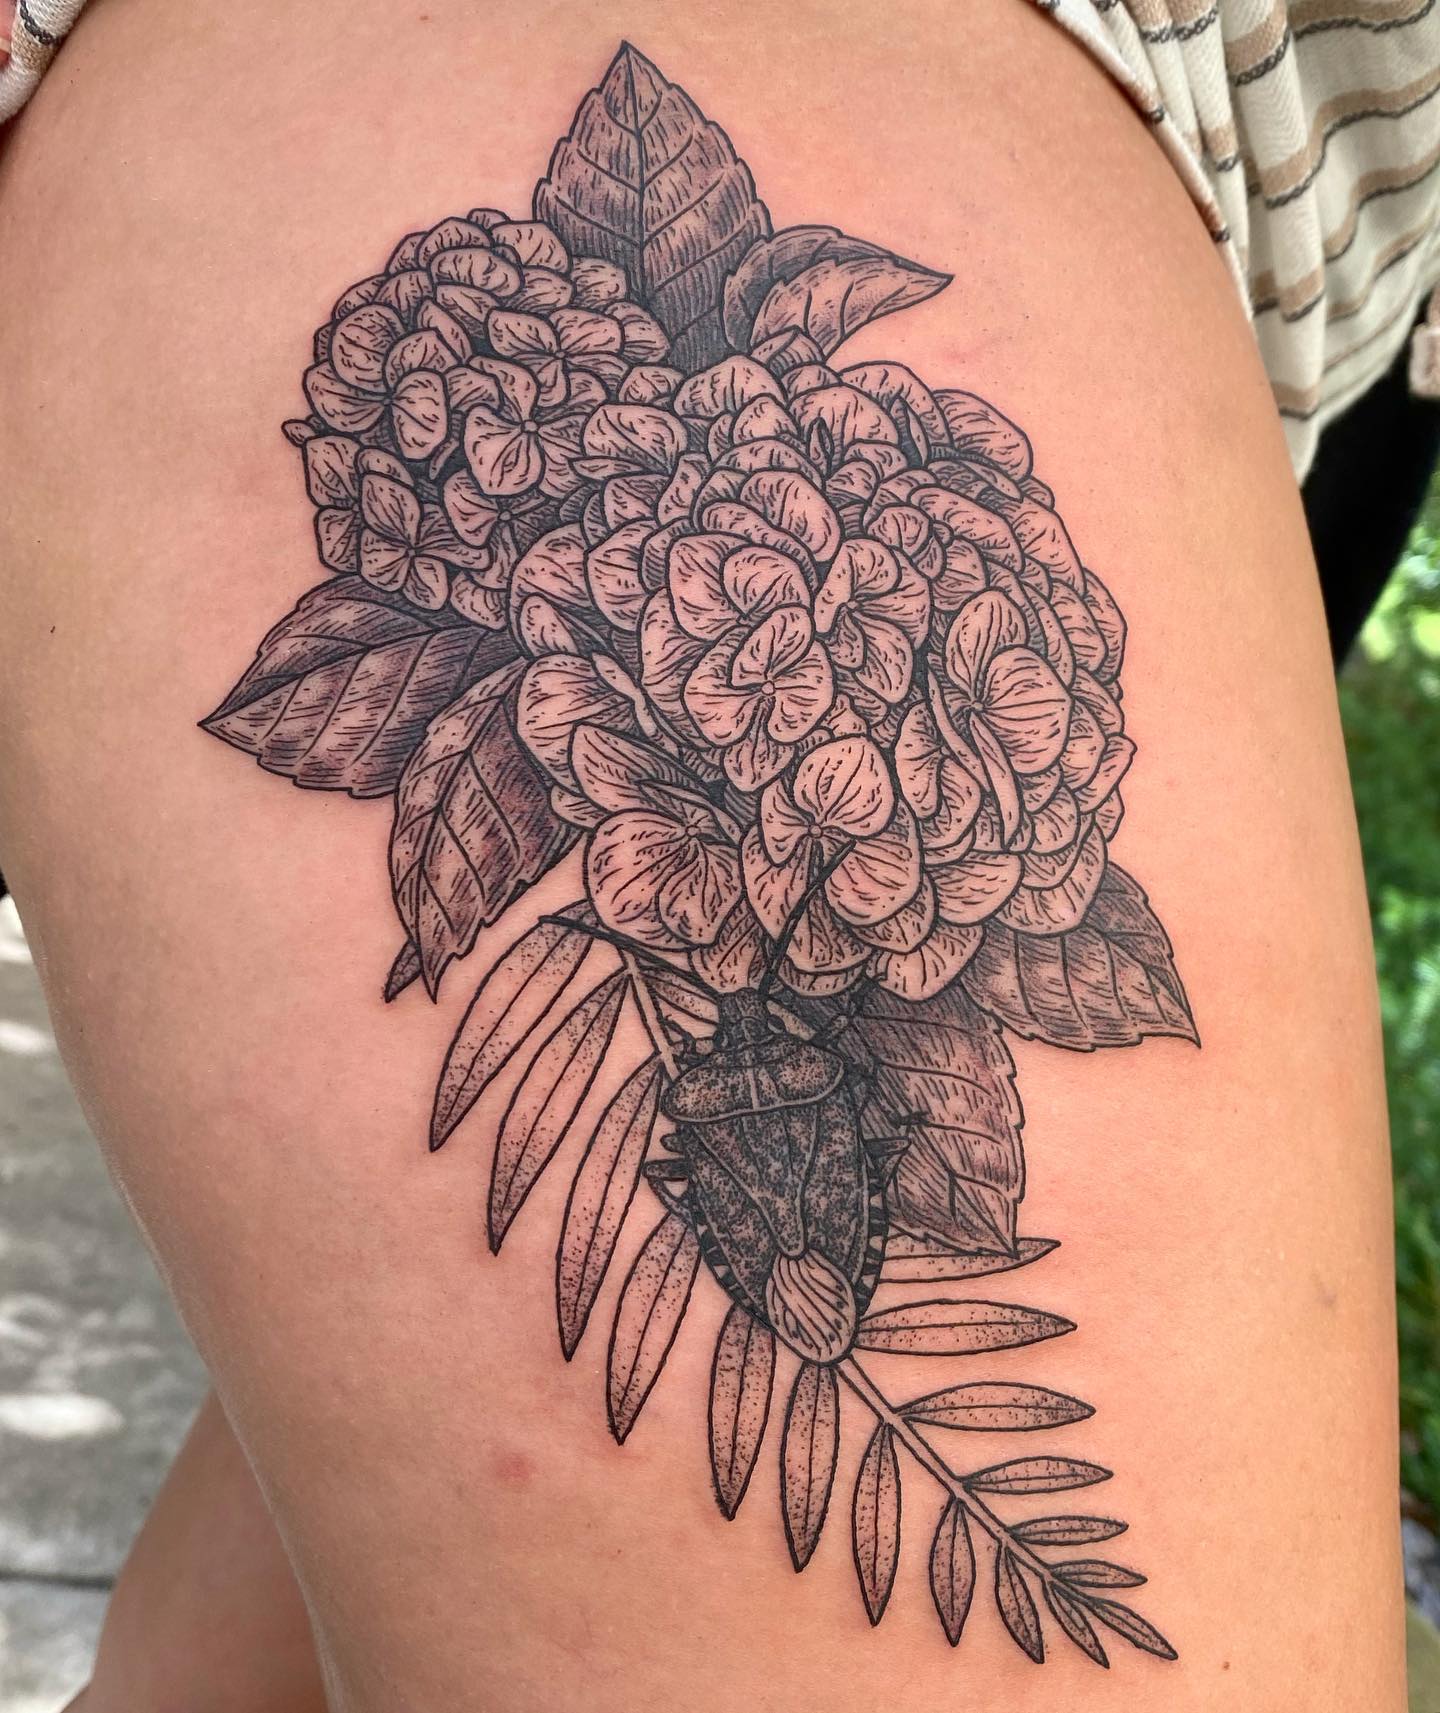 30+ Hydrangea Tattoo Designs As Unique As The Flower Itself - 100 Tattoos